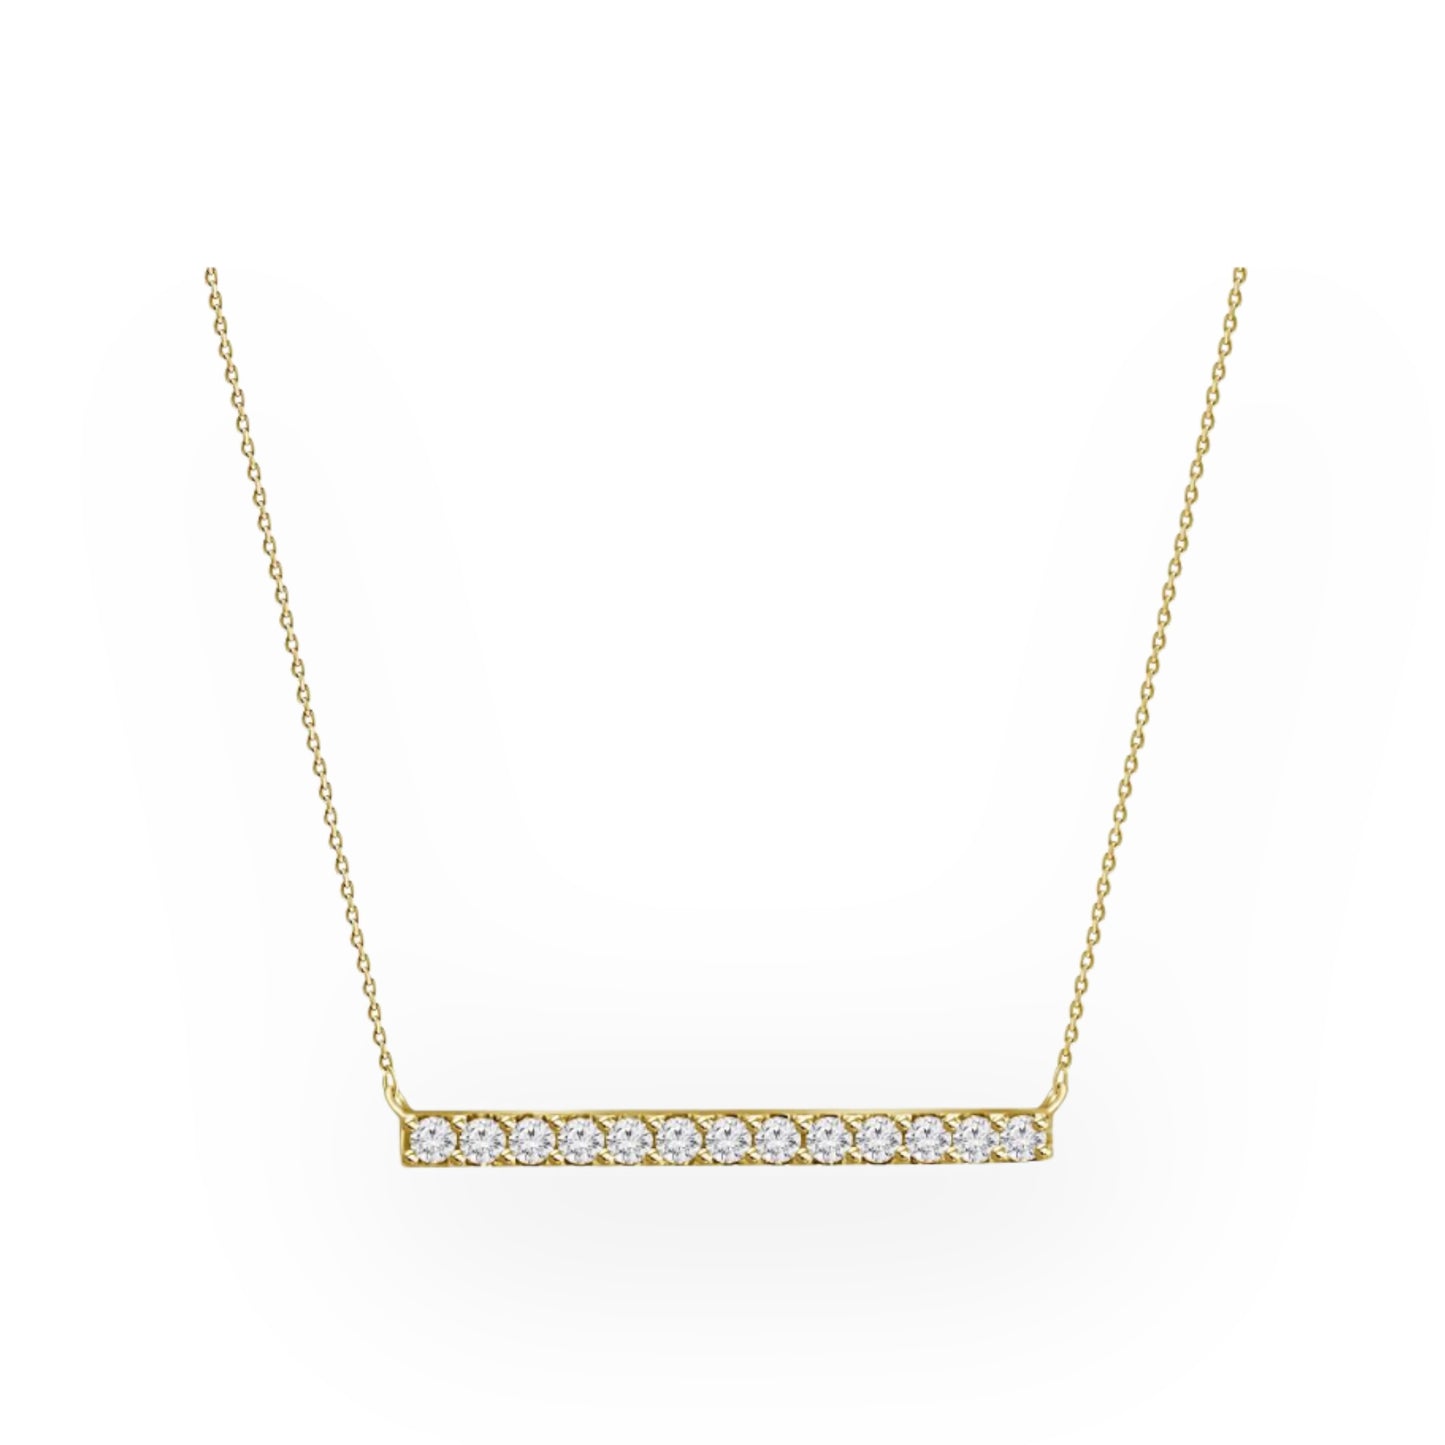 Load image into Gallery viewer, Diamond Bar Necklace
